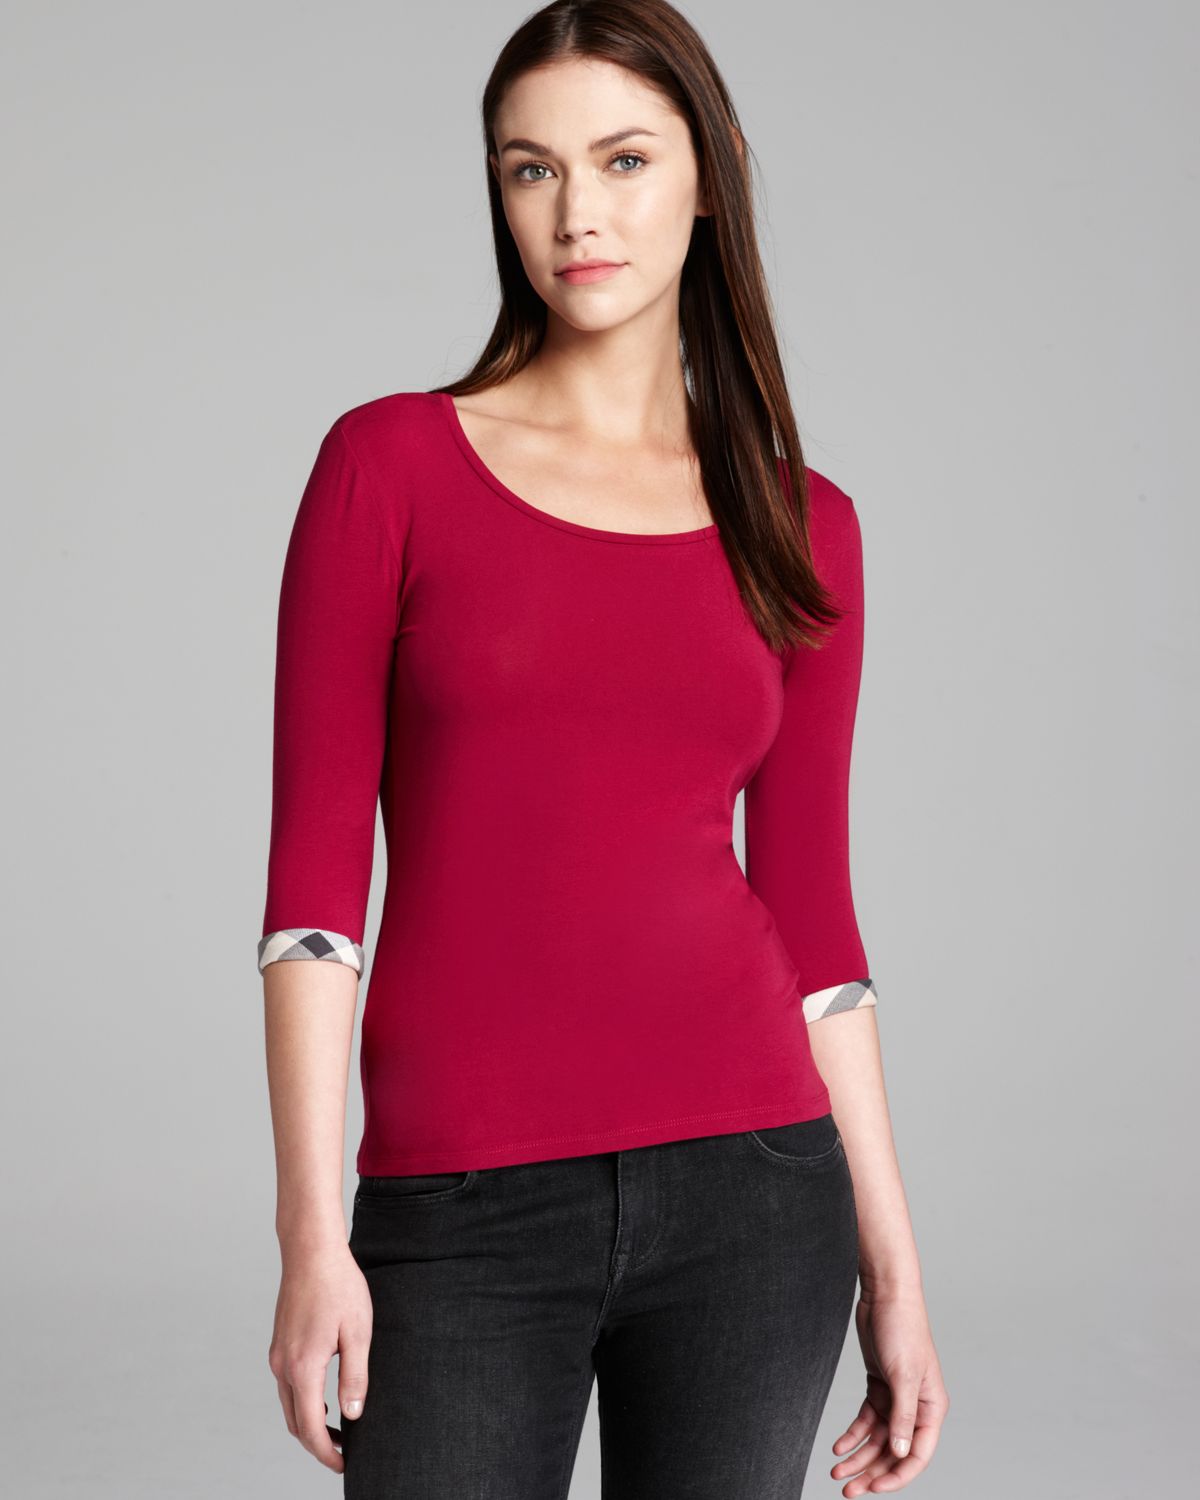 Burberry Brit Elbow Sleeve Tee with Check Cuffs in Red (Fritillary Pink ...